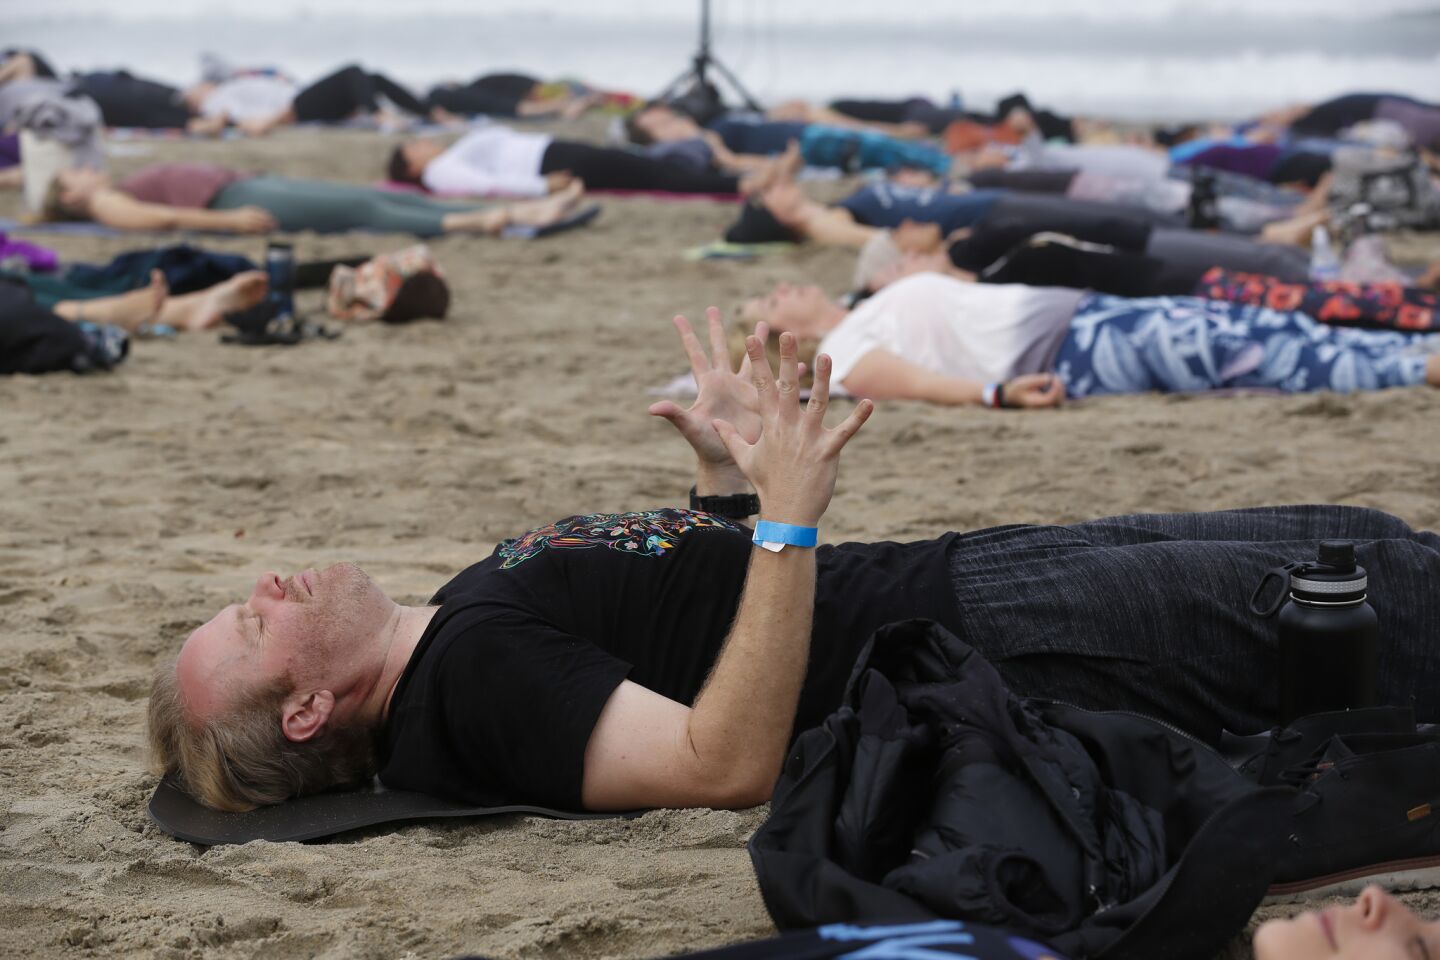 At the San Diego Yoga Festival held in Imperial Beach, several participants took part in the morning yoga session held Sunday on the sand near the Imperial Beach Pier.